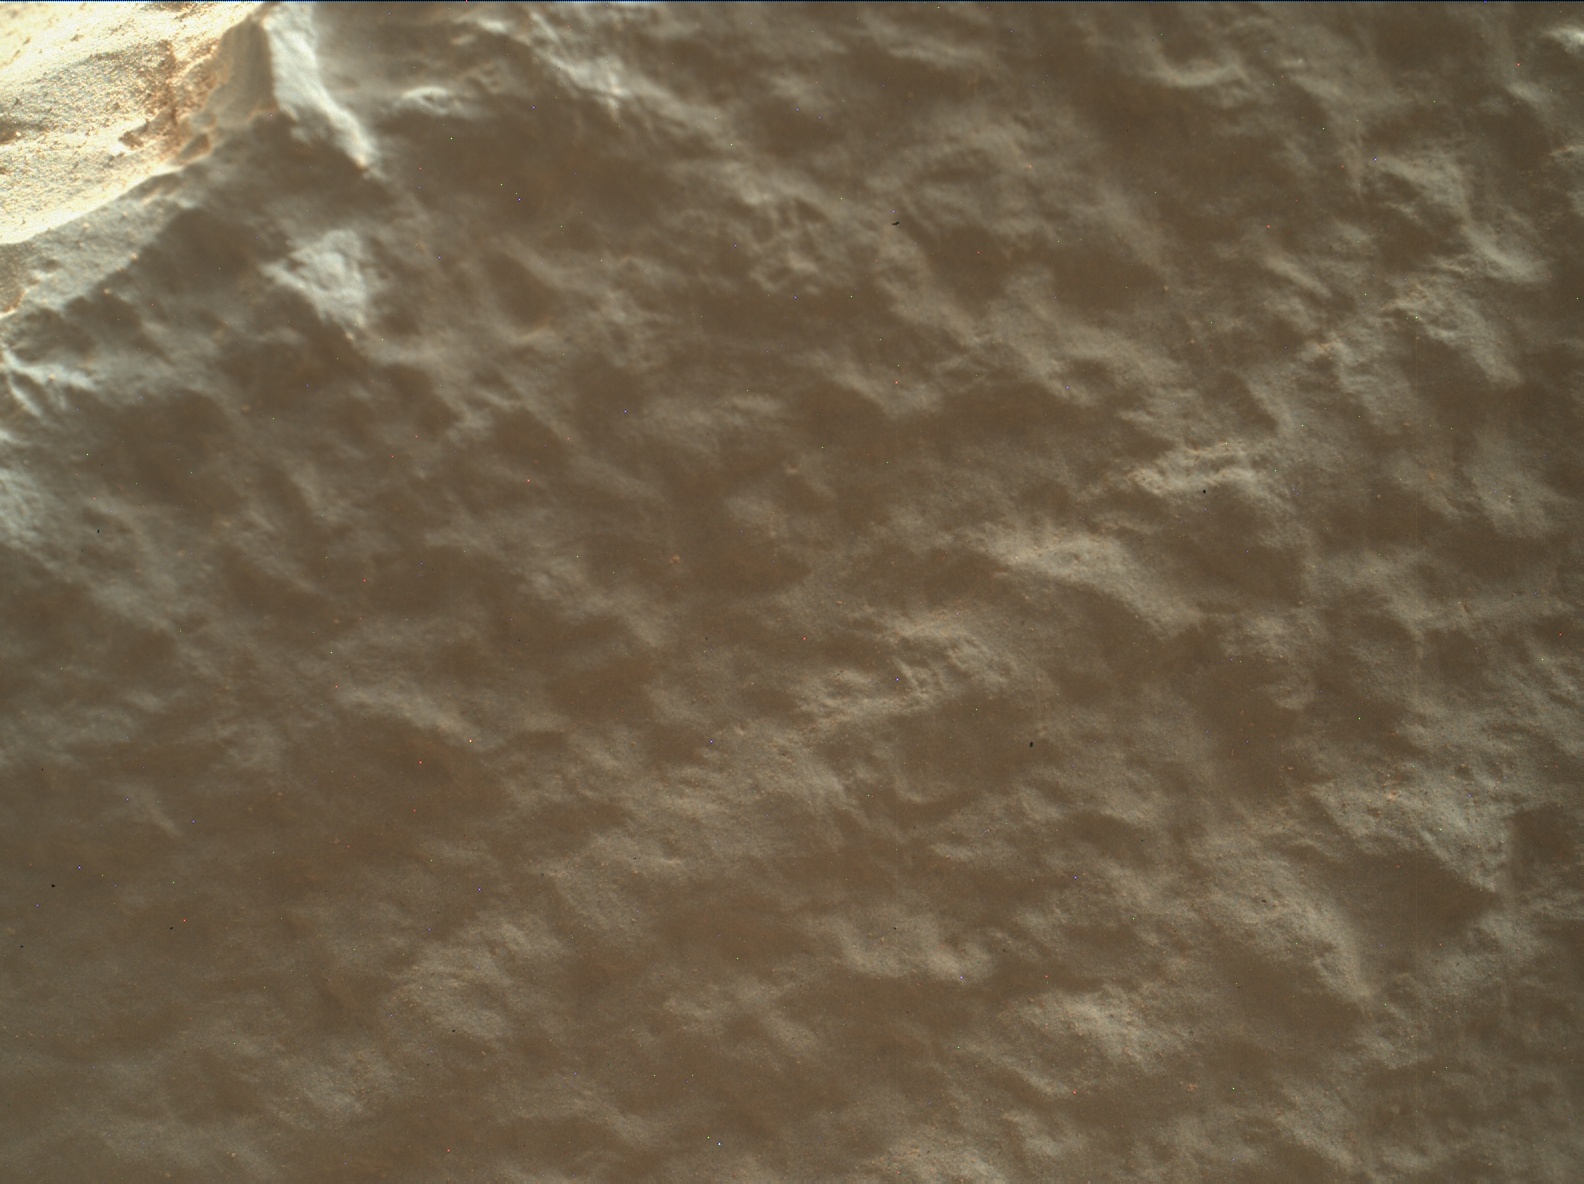 Nasa's Mars rover Curiosity acquired this image using its Mars Hand Lens Imager (MAHLI) on Sol 3926